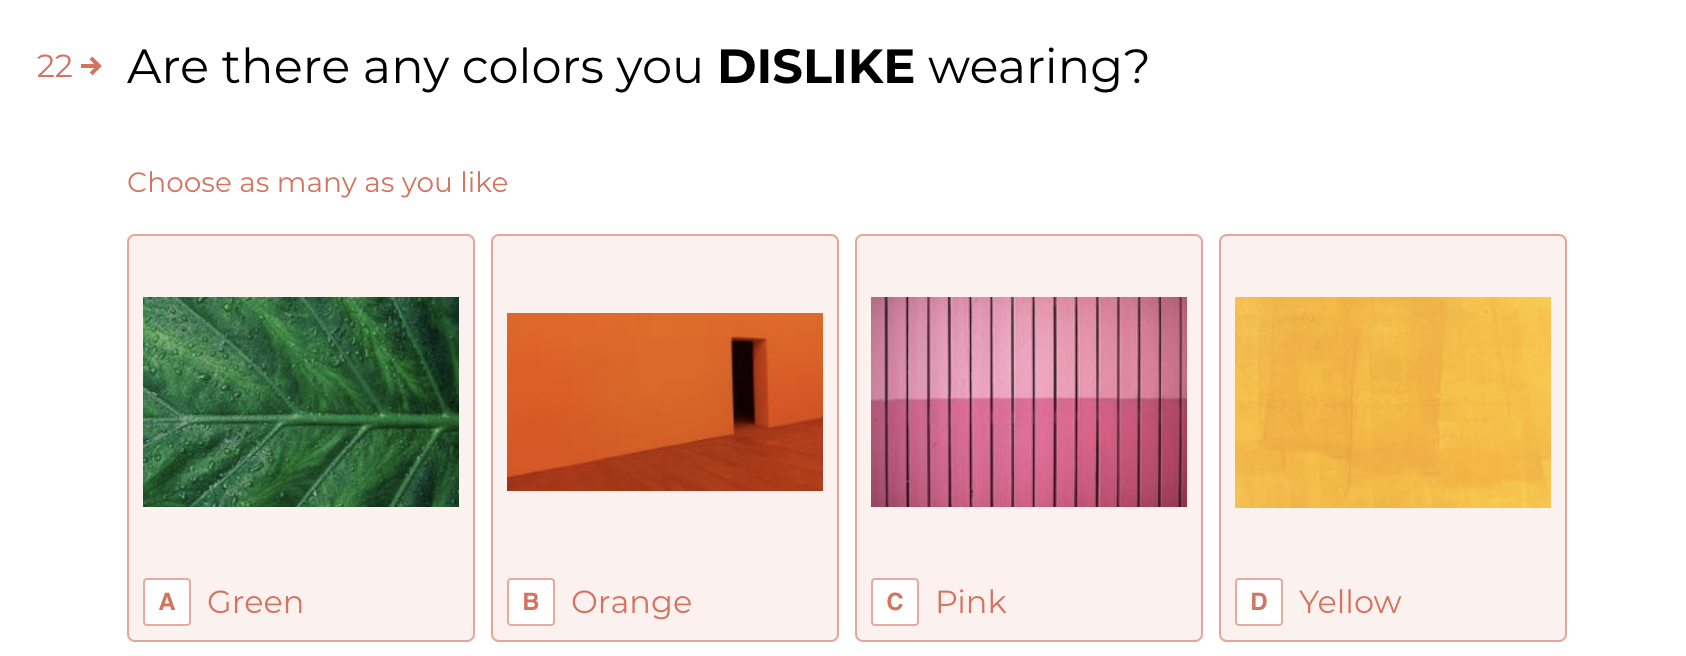 The question &quot;Are there any colors you dislike wearing?&quot; with color choices